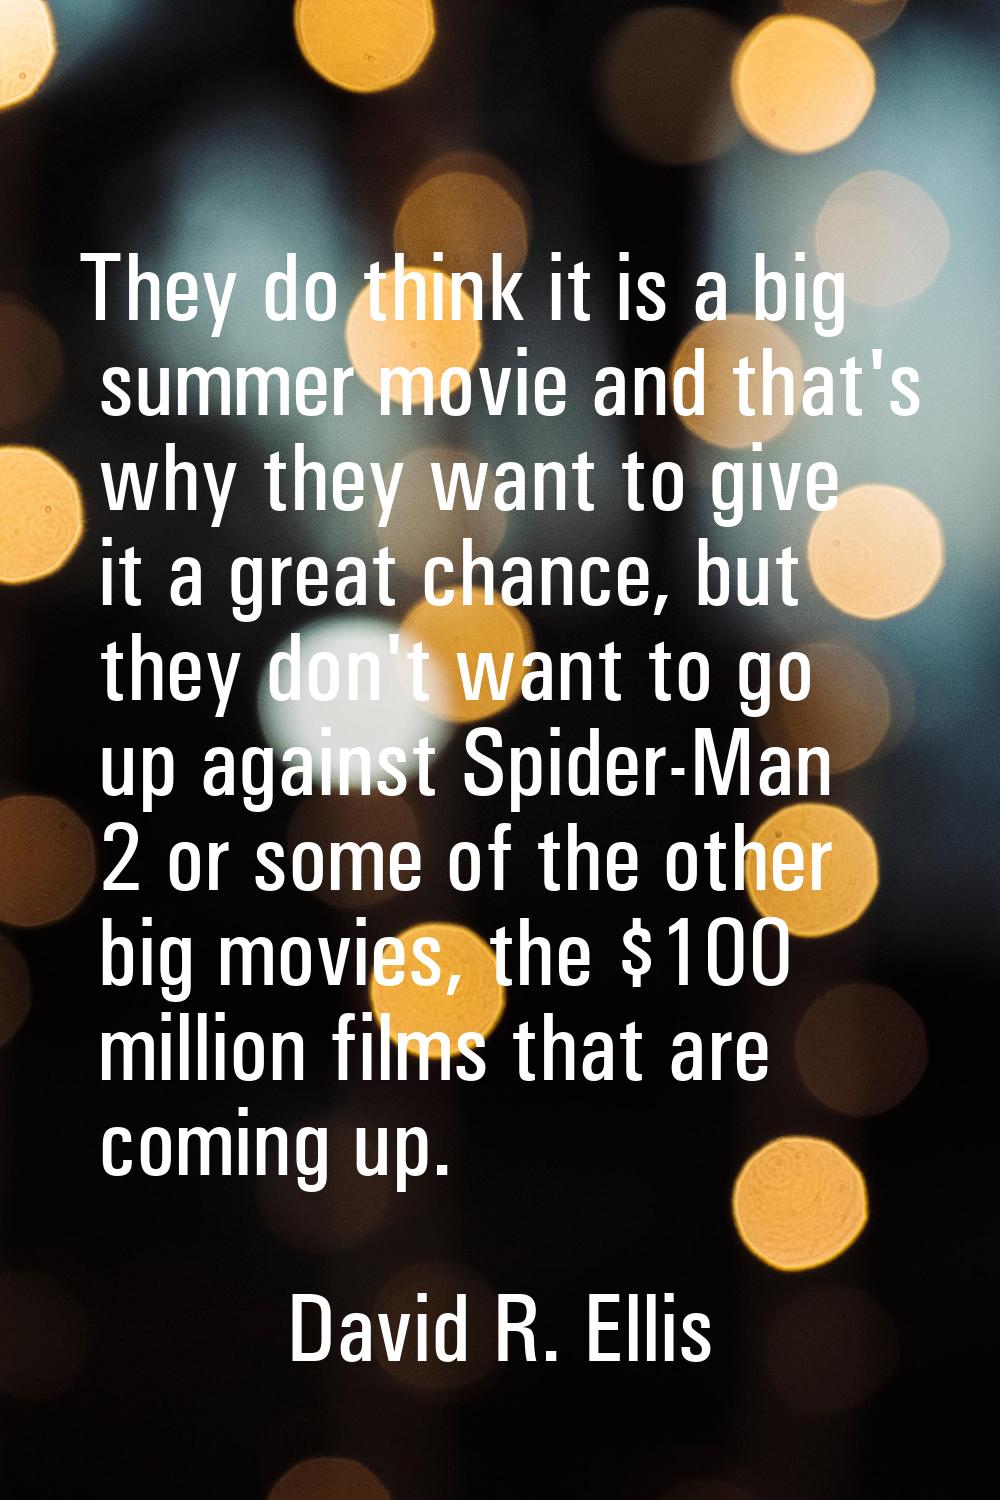 They do think it is a big summer movie and that's why they want to give it a great chance, but they